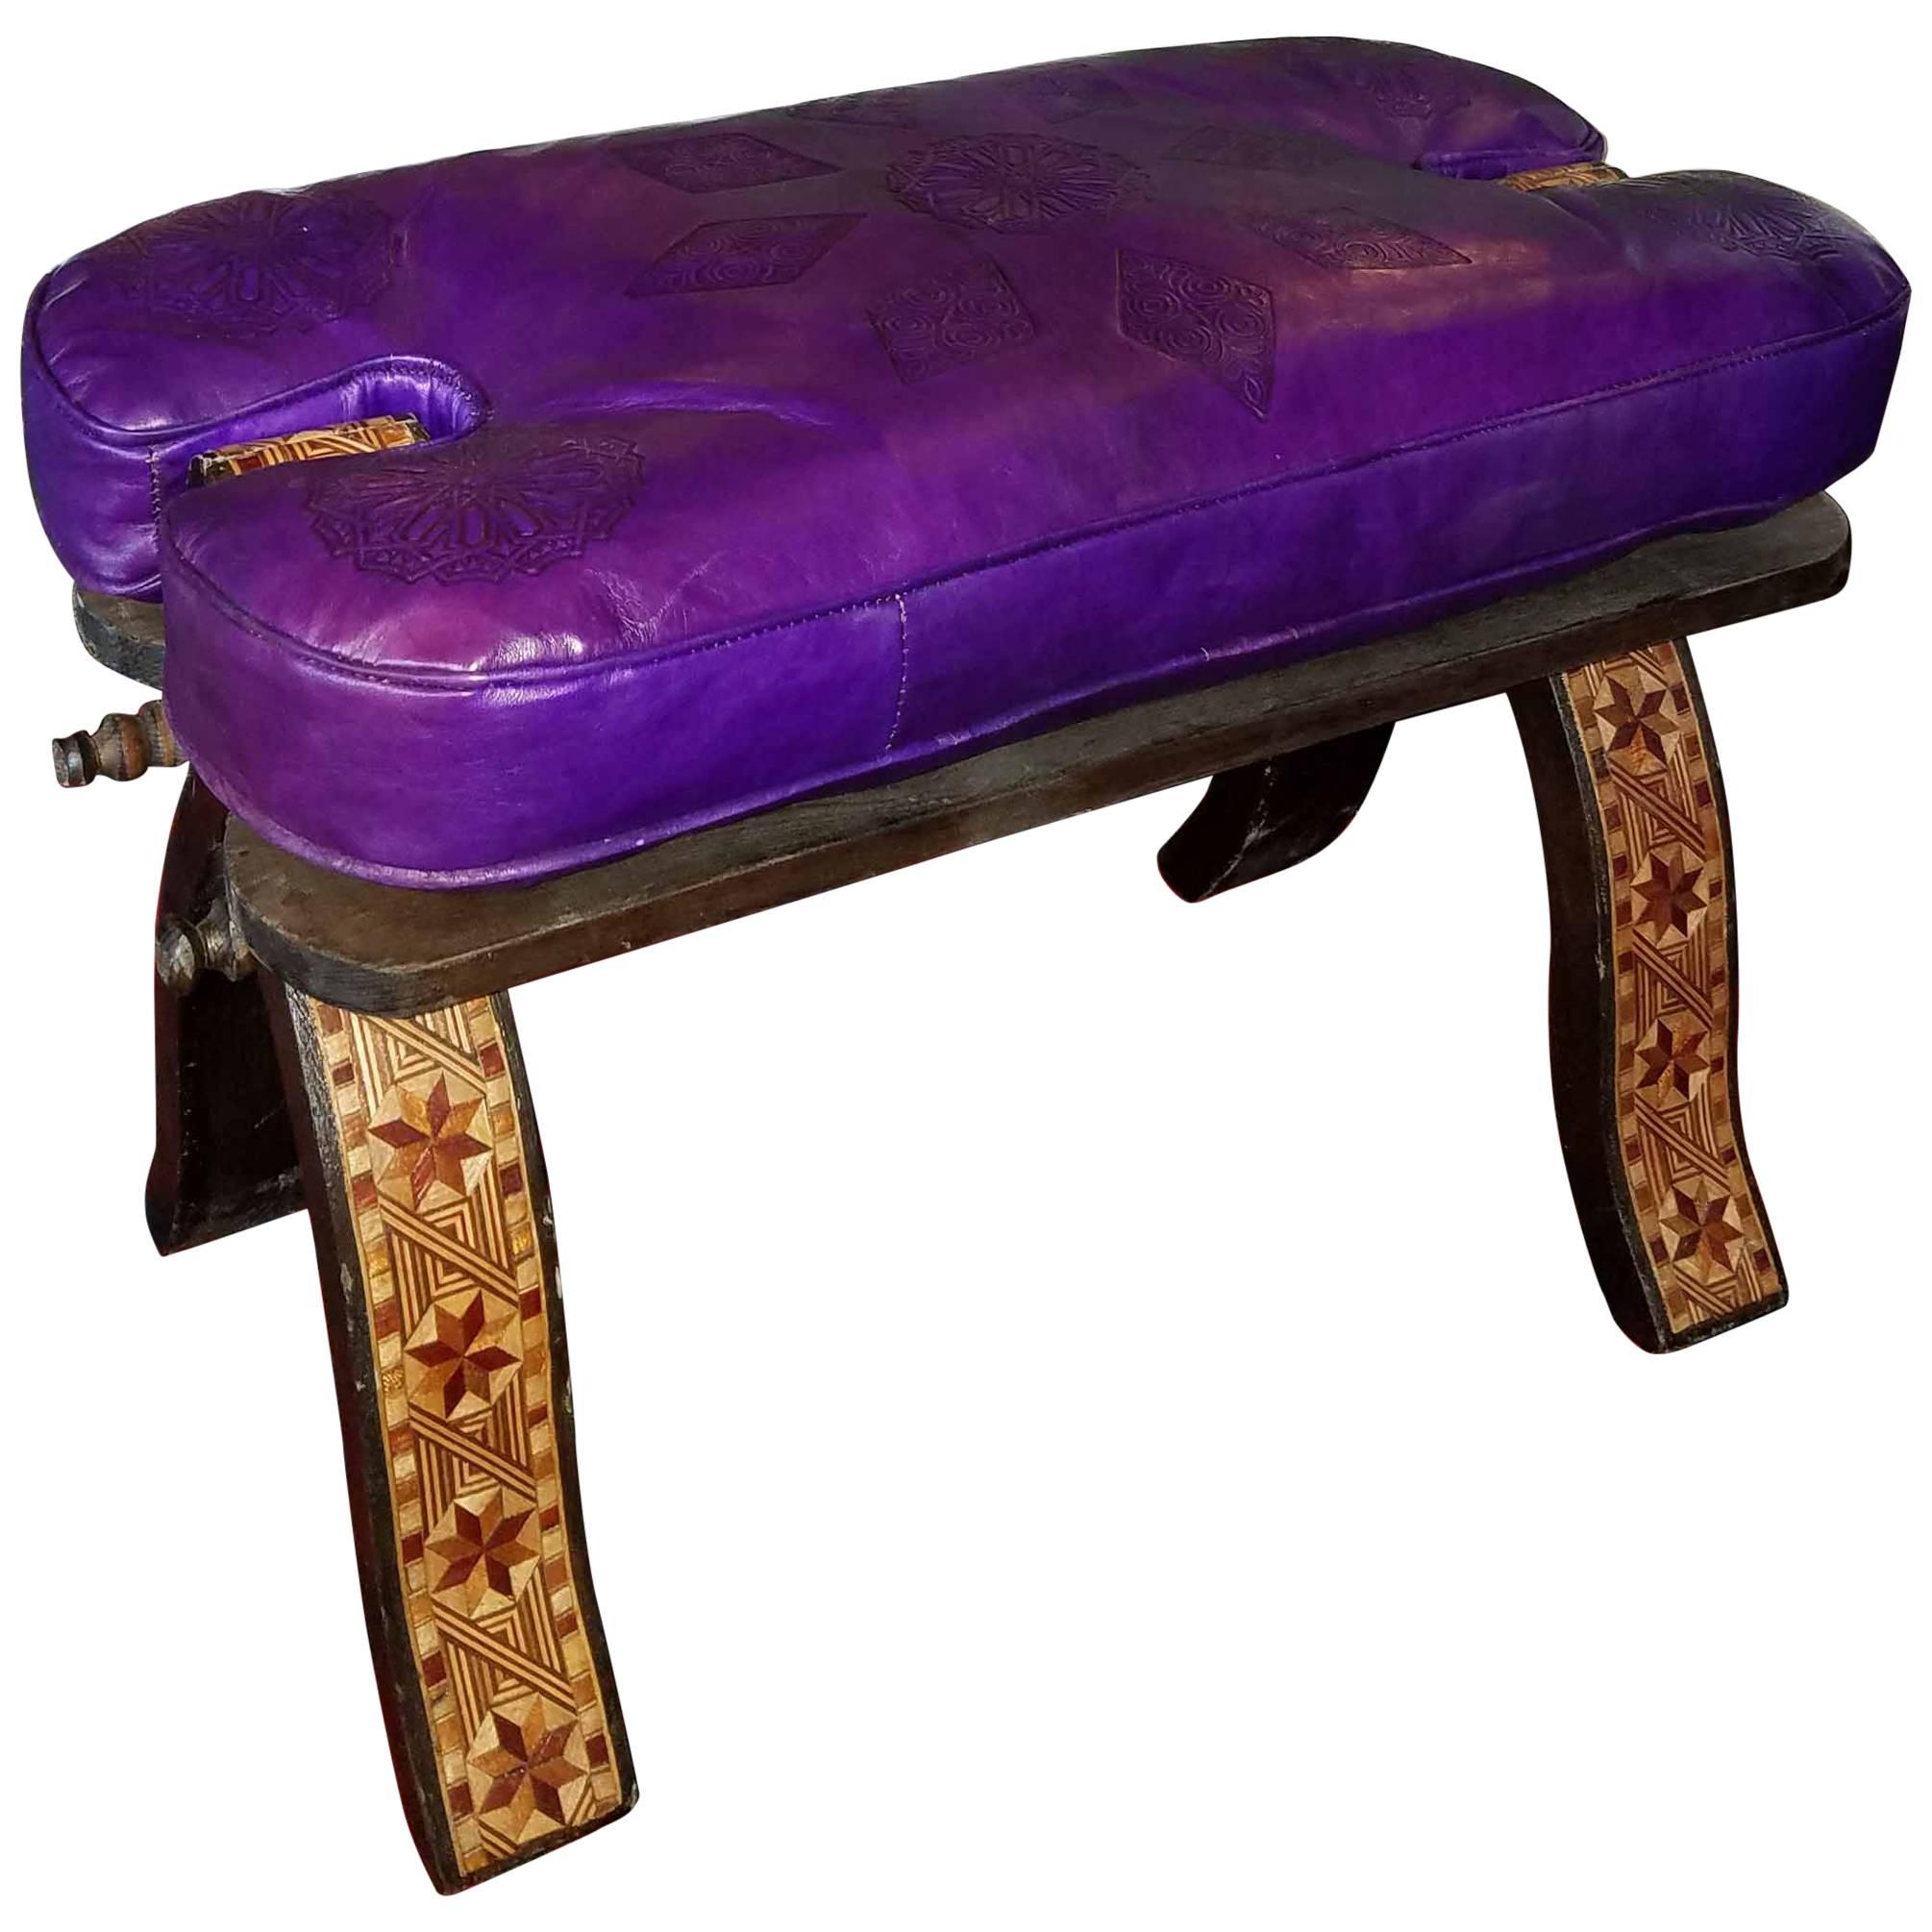 Handmade Moroccan Camel Saddle Bright Purple Leather Cushion For Sale